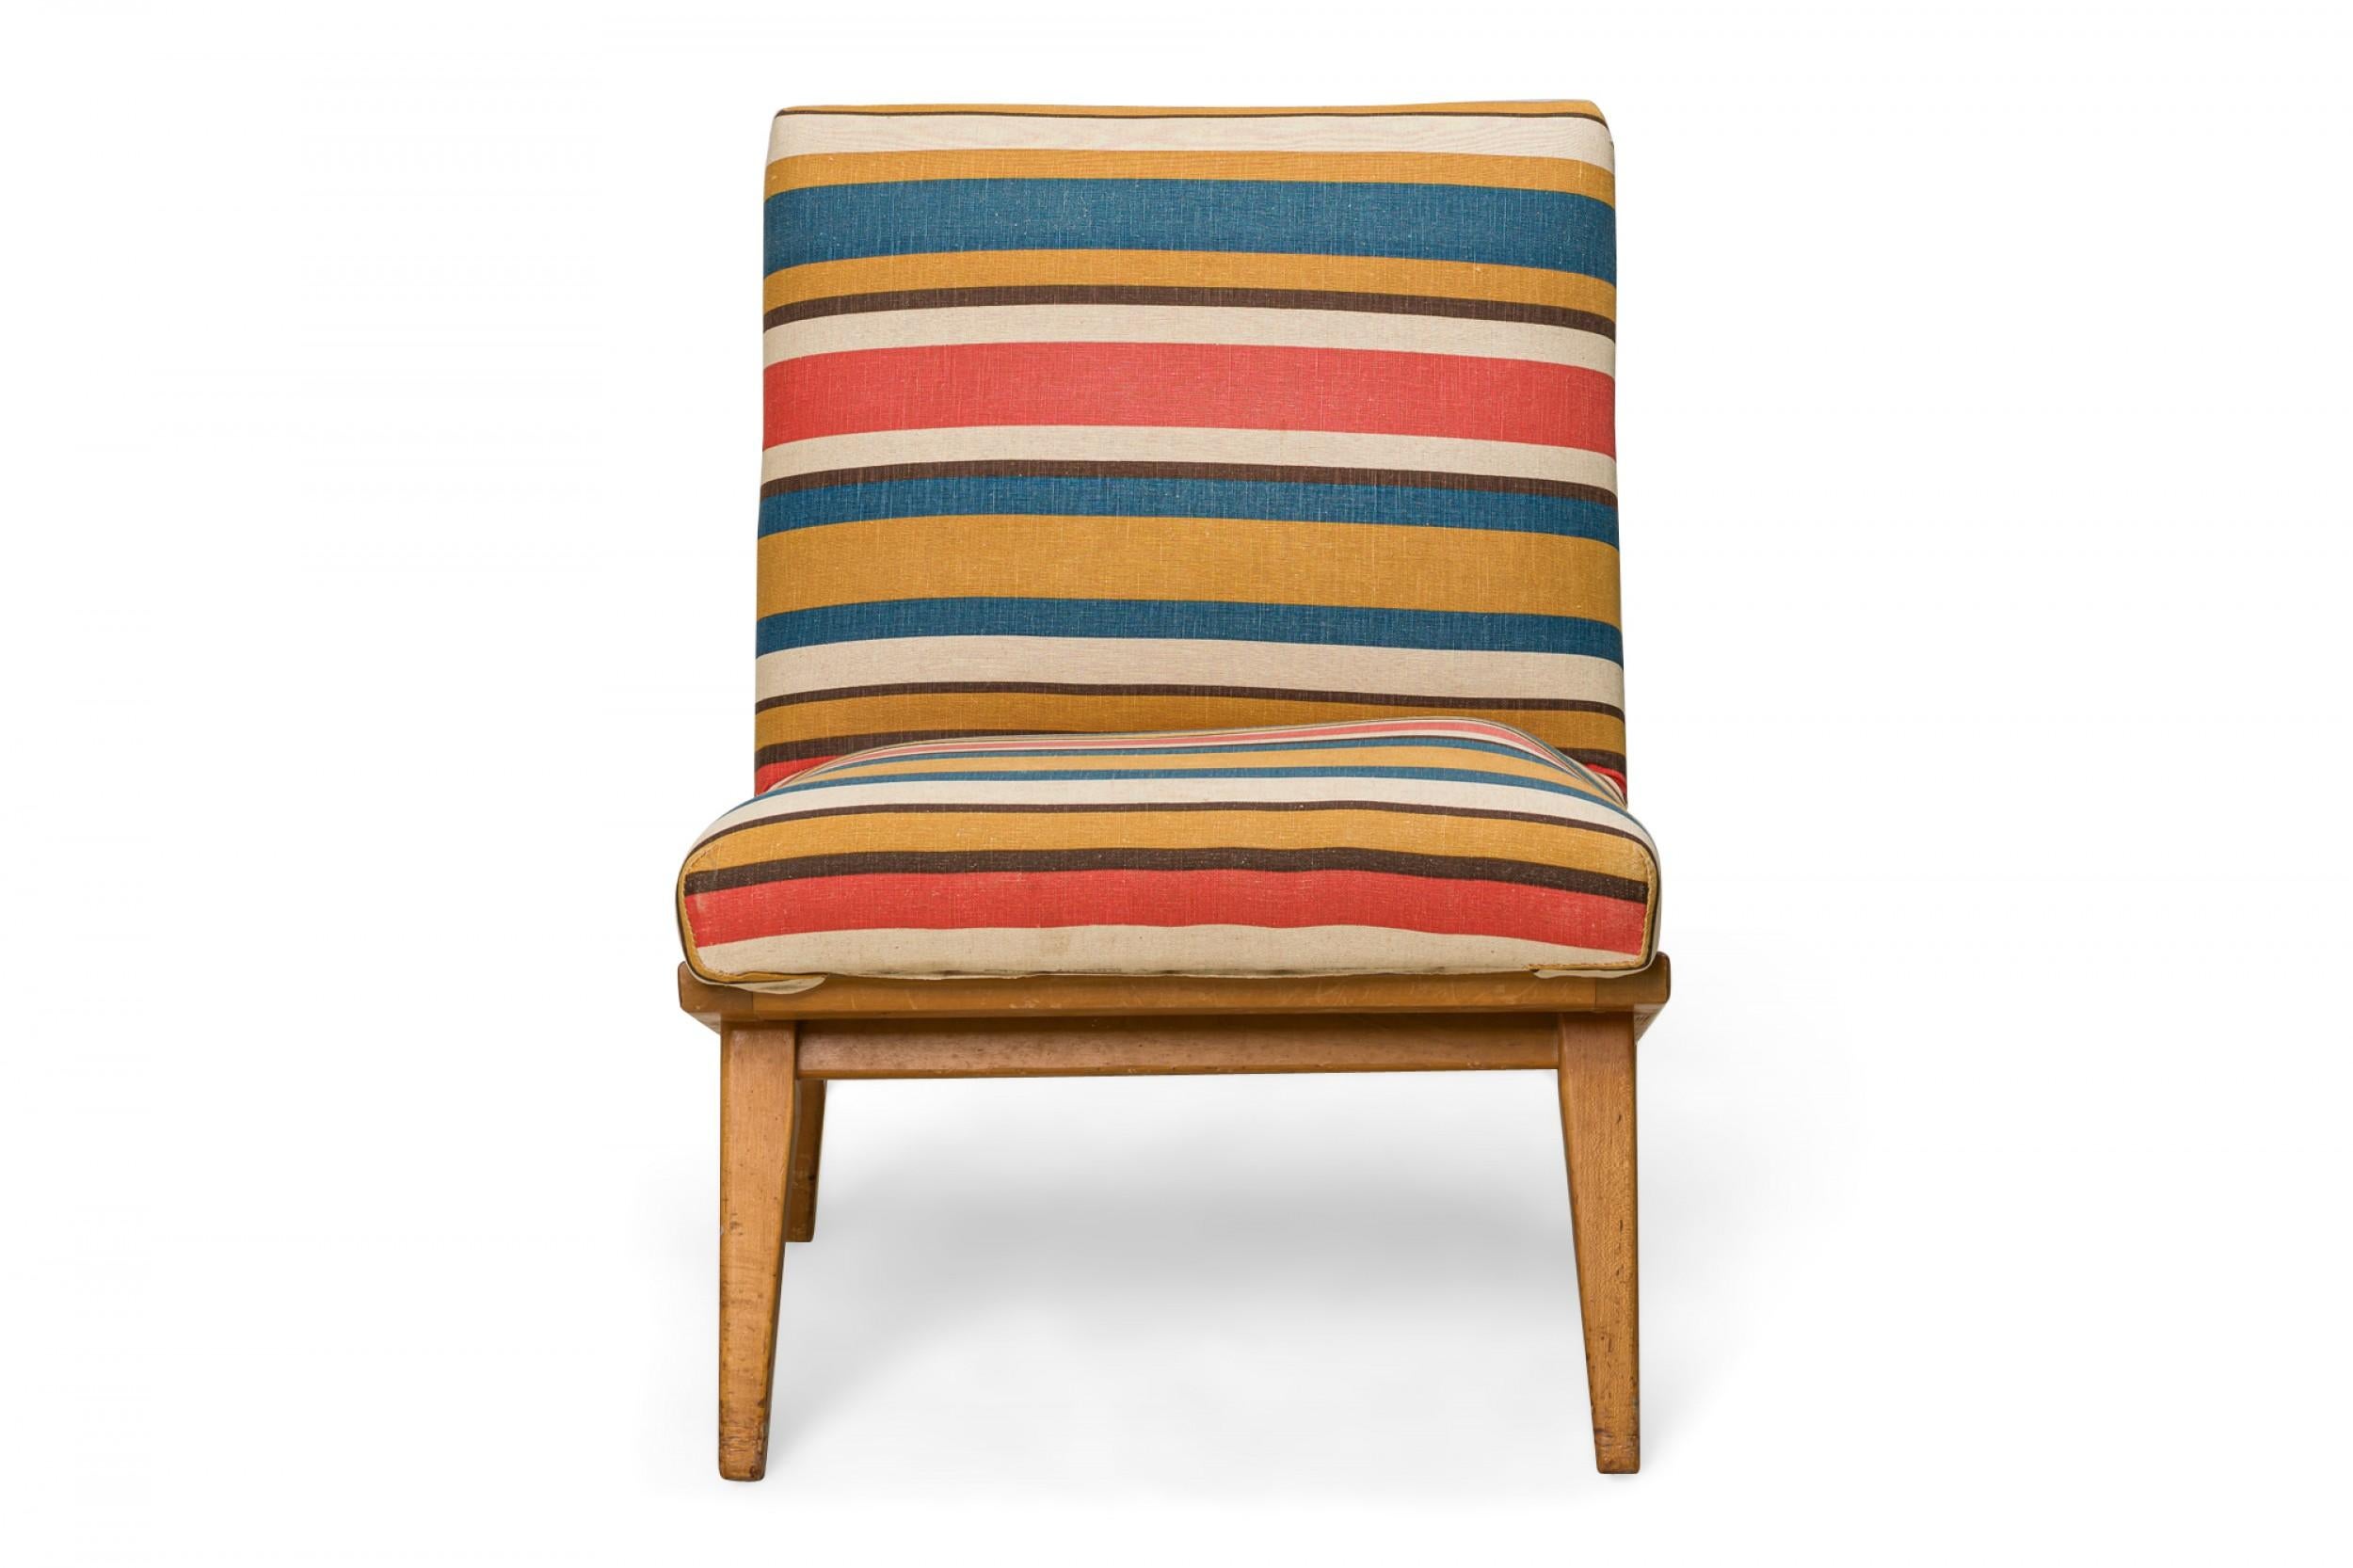 Mid-Century Modern slipper / side chair with red, blue, yellow, and beige striped fabric upholstery, resting on an angled blonde wood base with angled and tapered legs. (JENS RISOM FOR KNOLL)(Similar pieces: DUF0452-DUF0454)
 